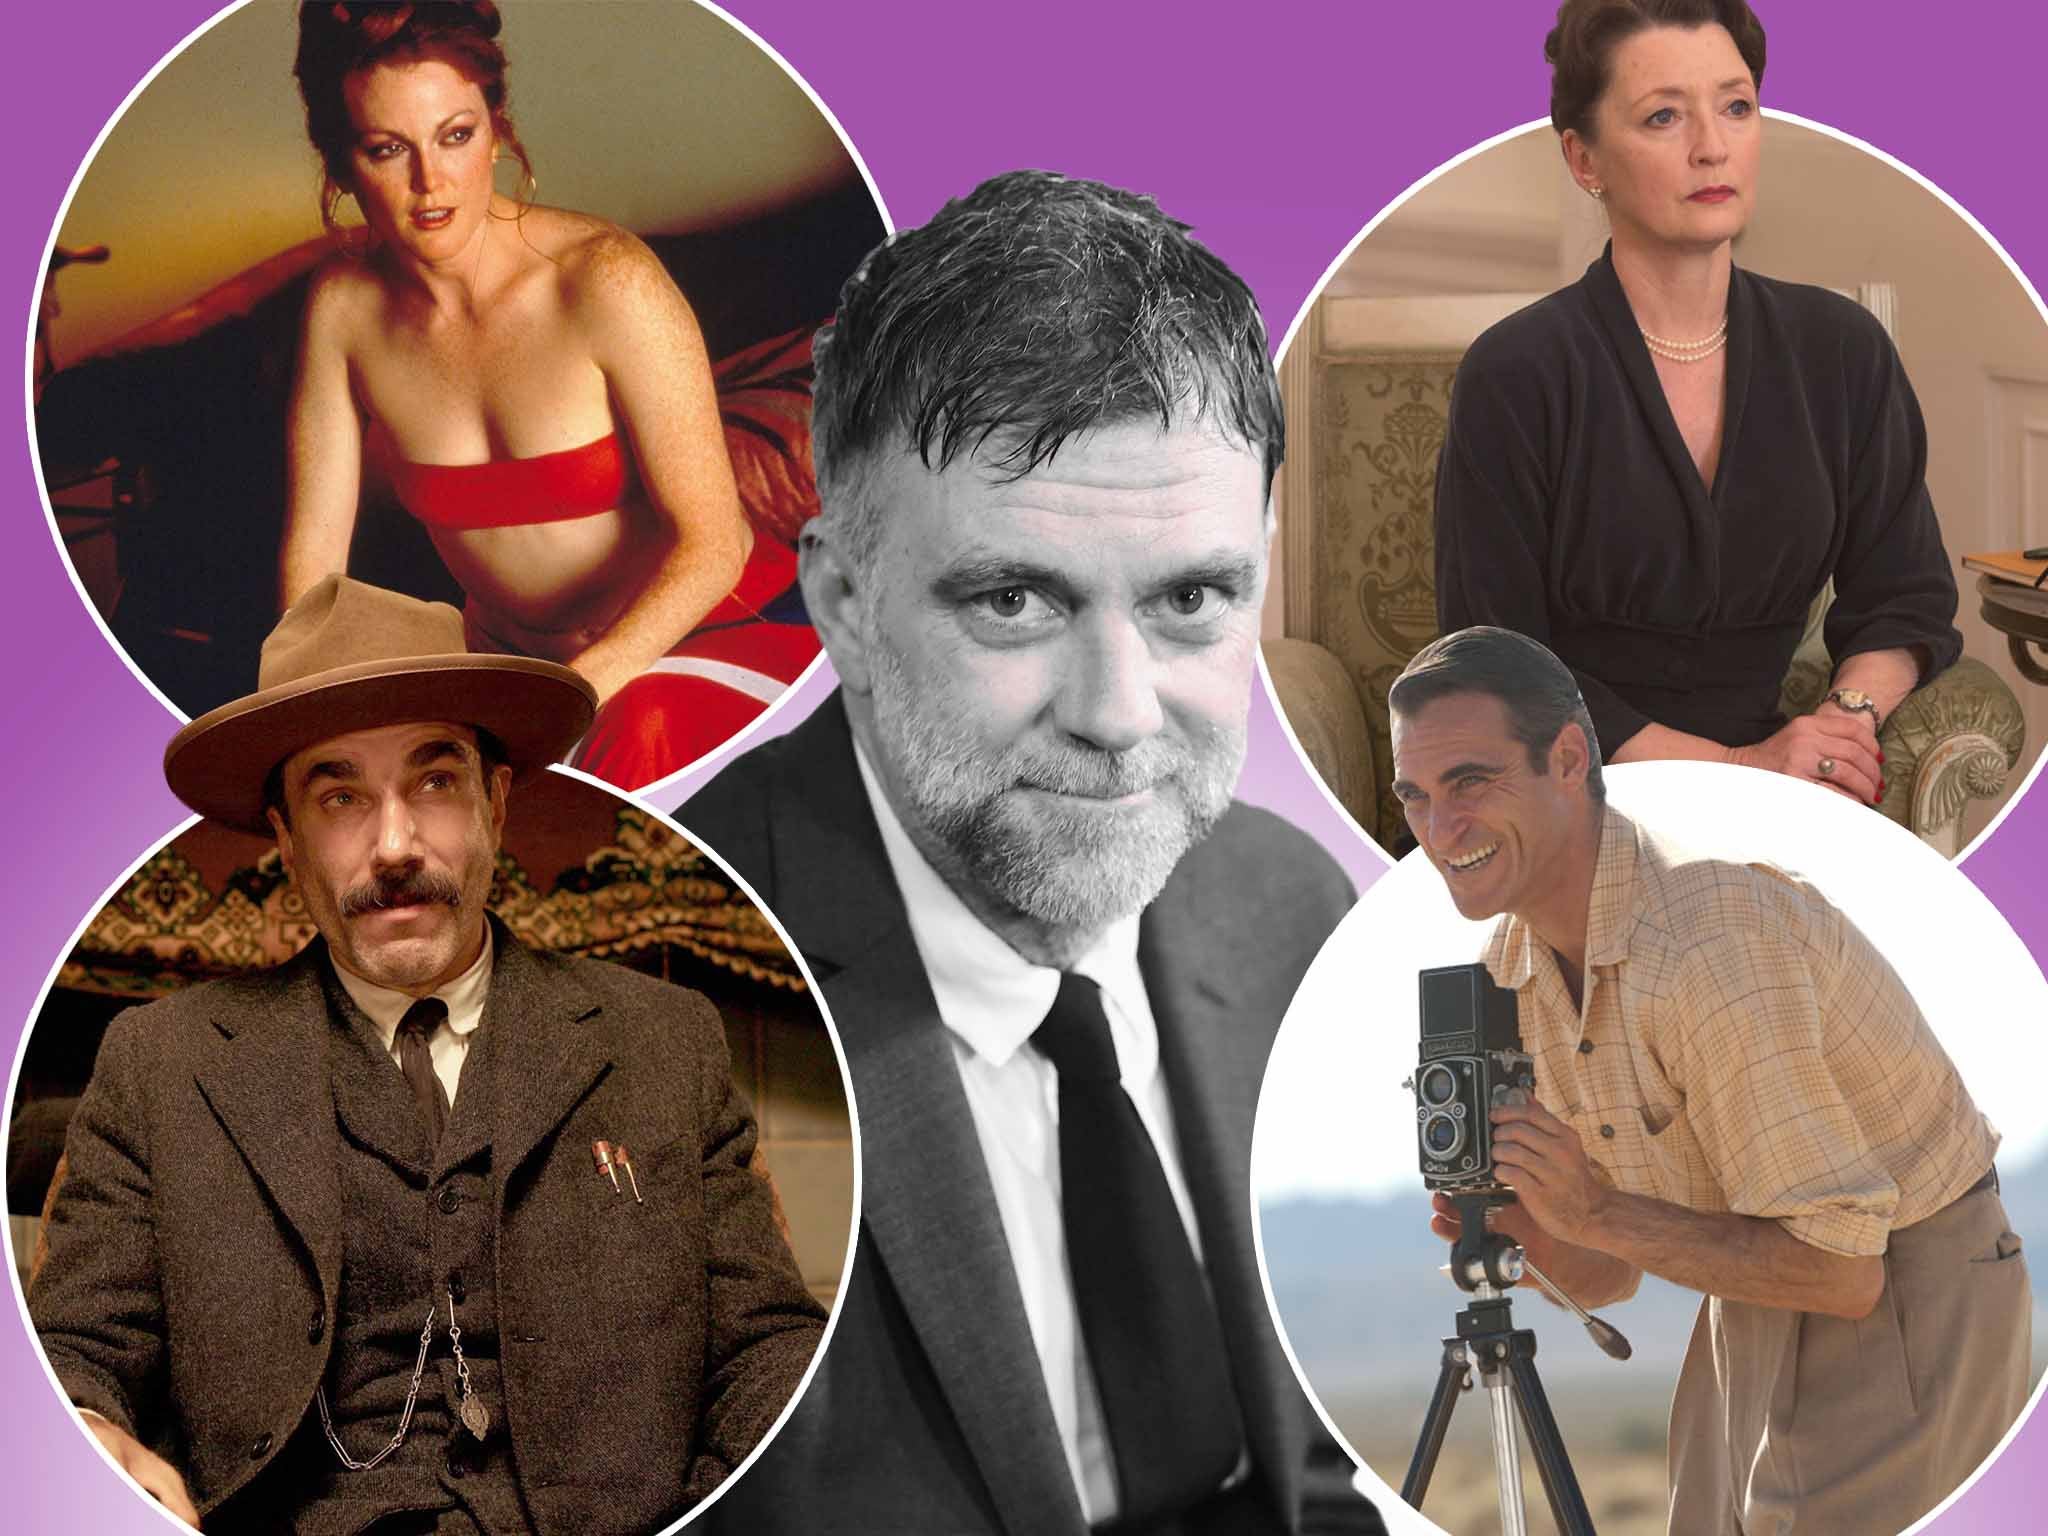 Paul Thomas Anderson (centre), and Lesley Manville, Joaquin Phoenix, Daniel Day-Lewis and Julianne Moore (clockwise from top right)